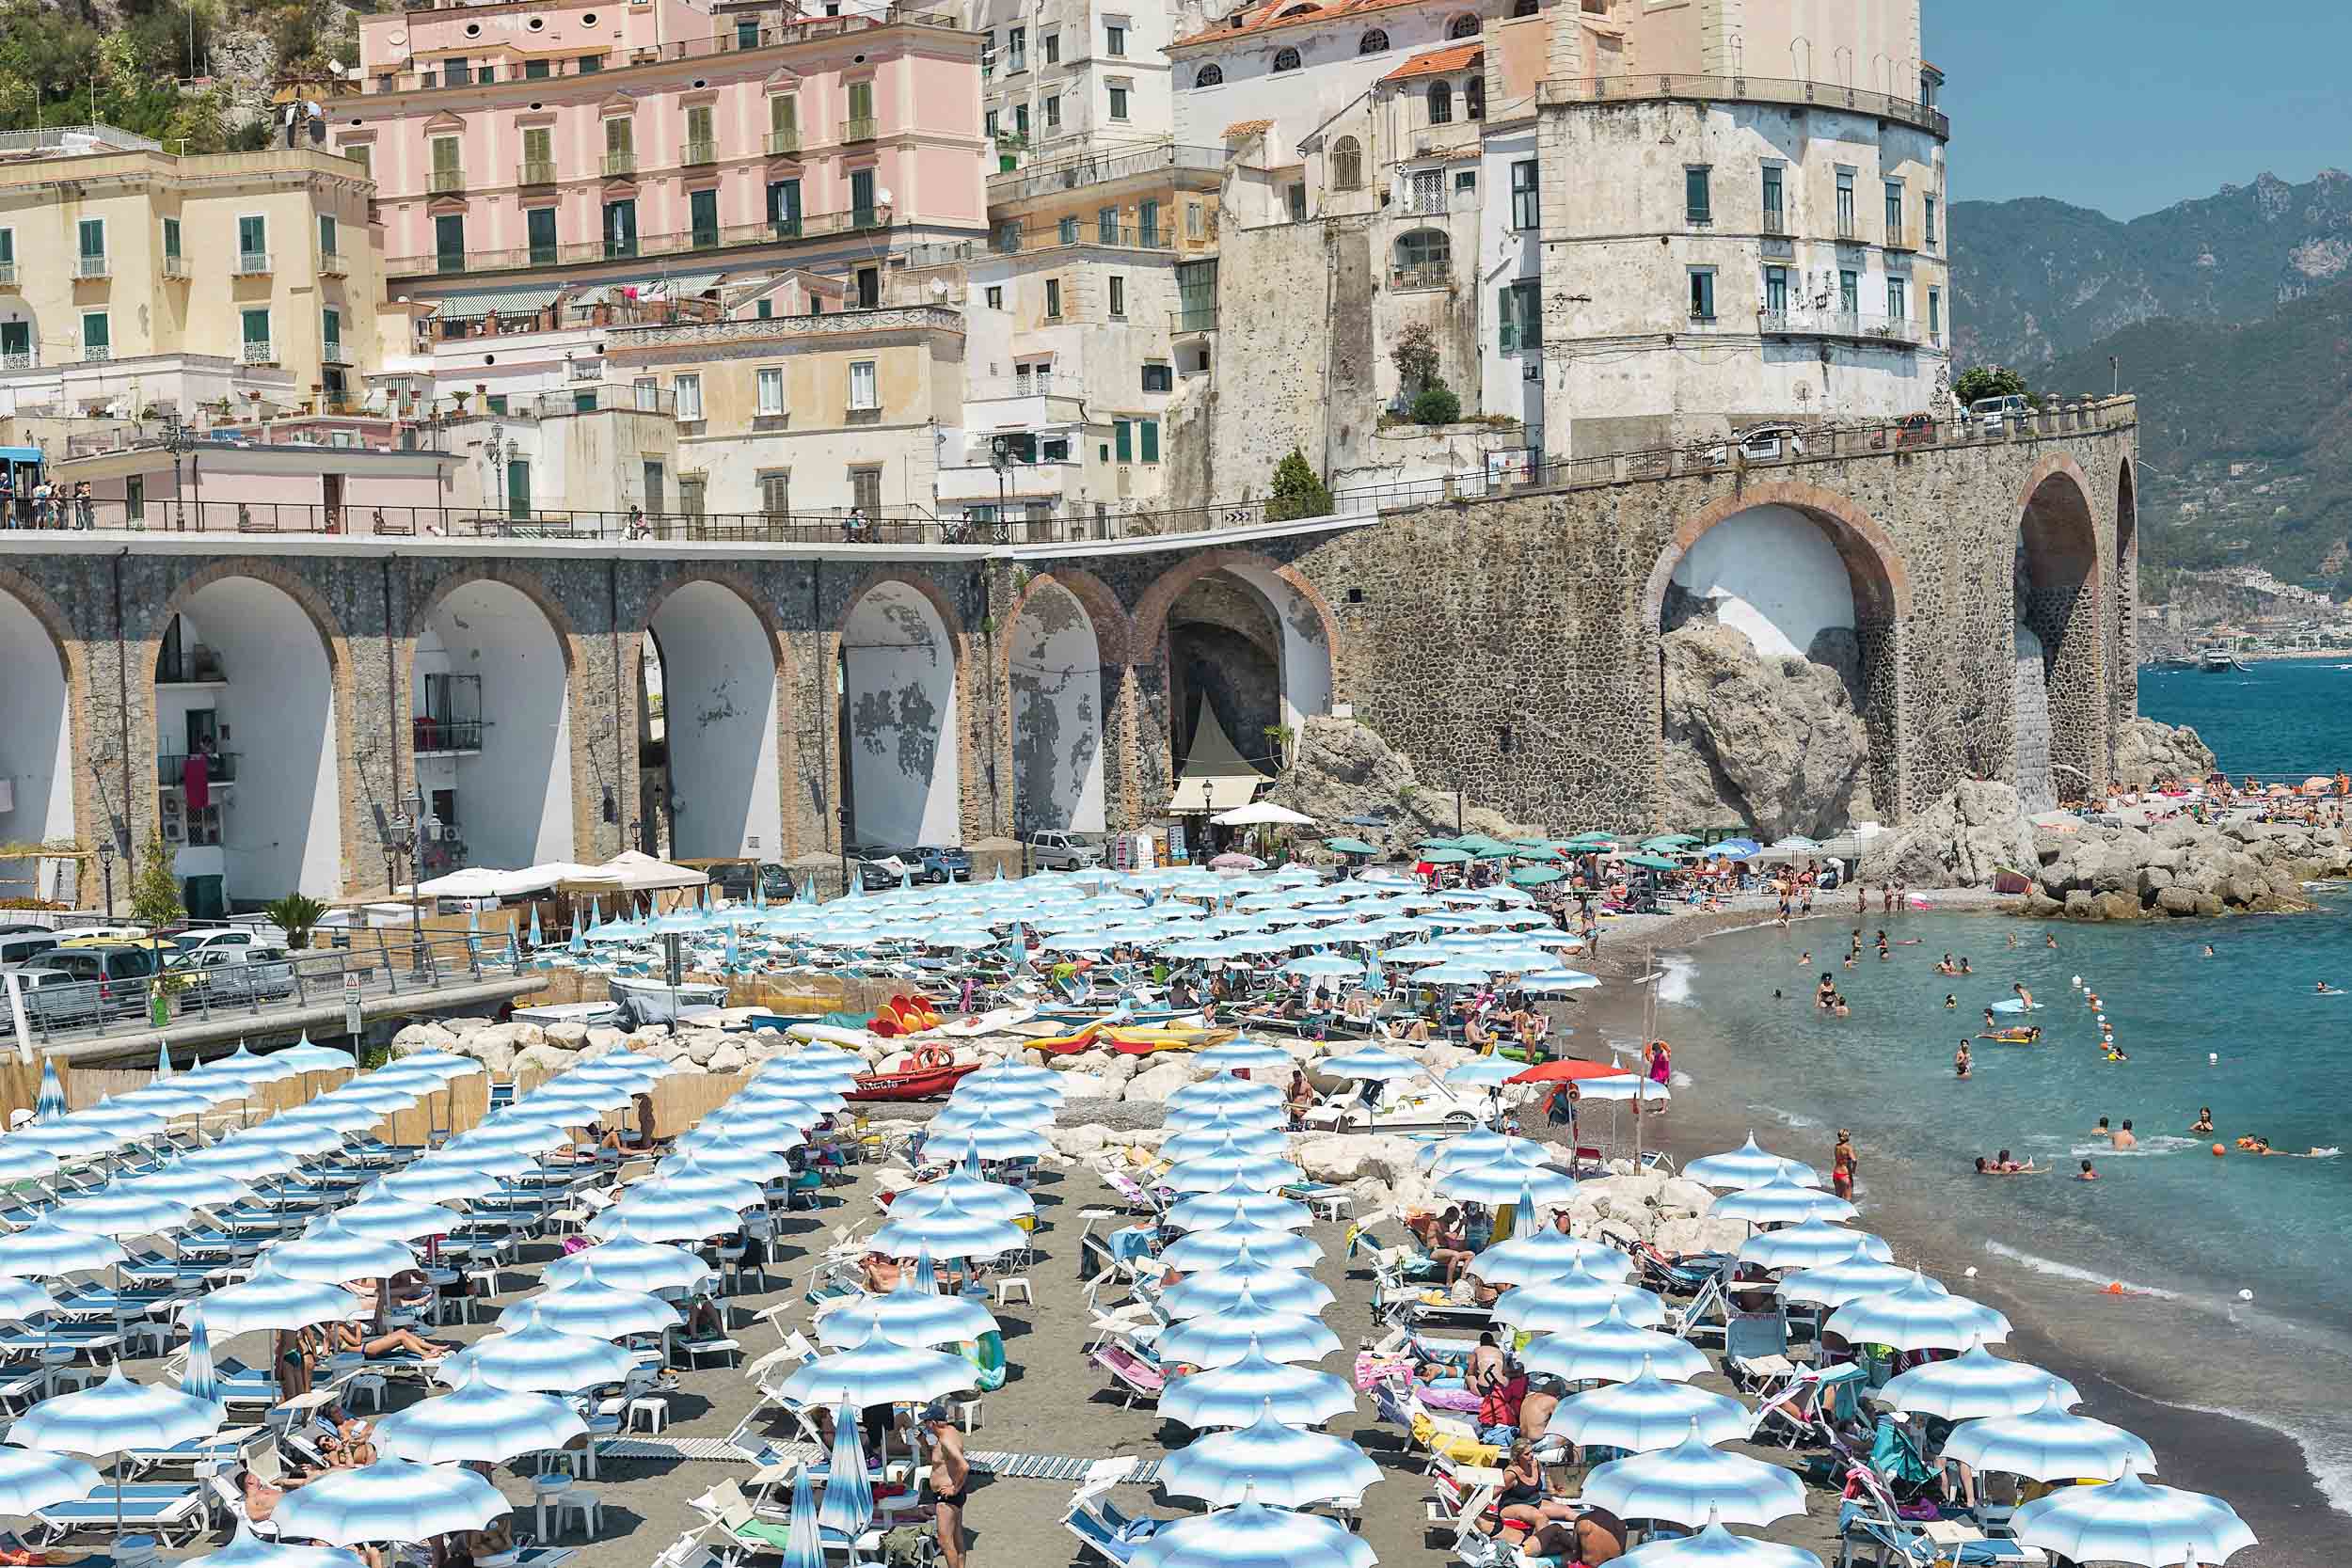 Everything you need to know about Positano, including where to stay, how to get there, what to do, and where to eat and drink